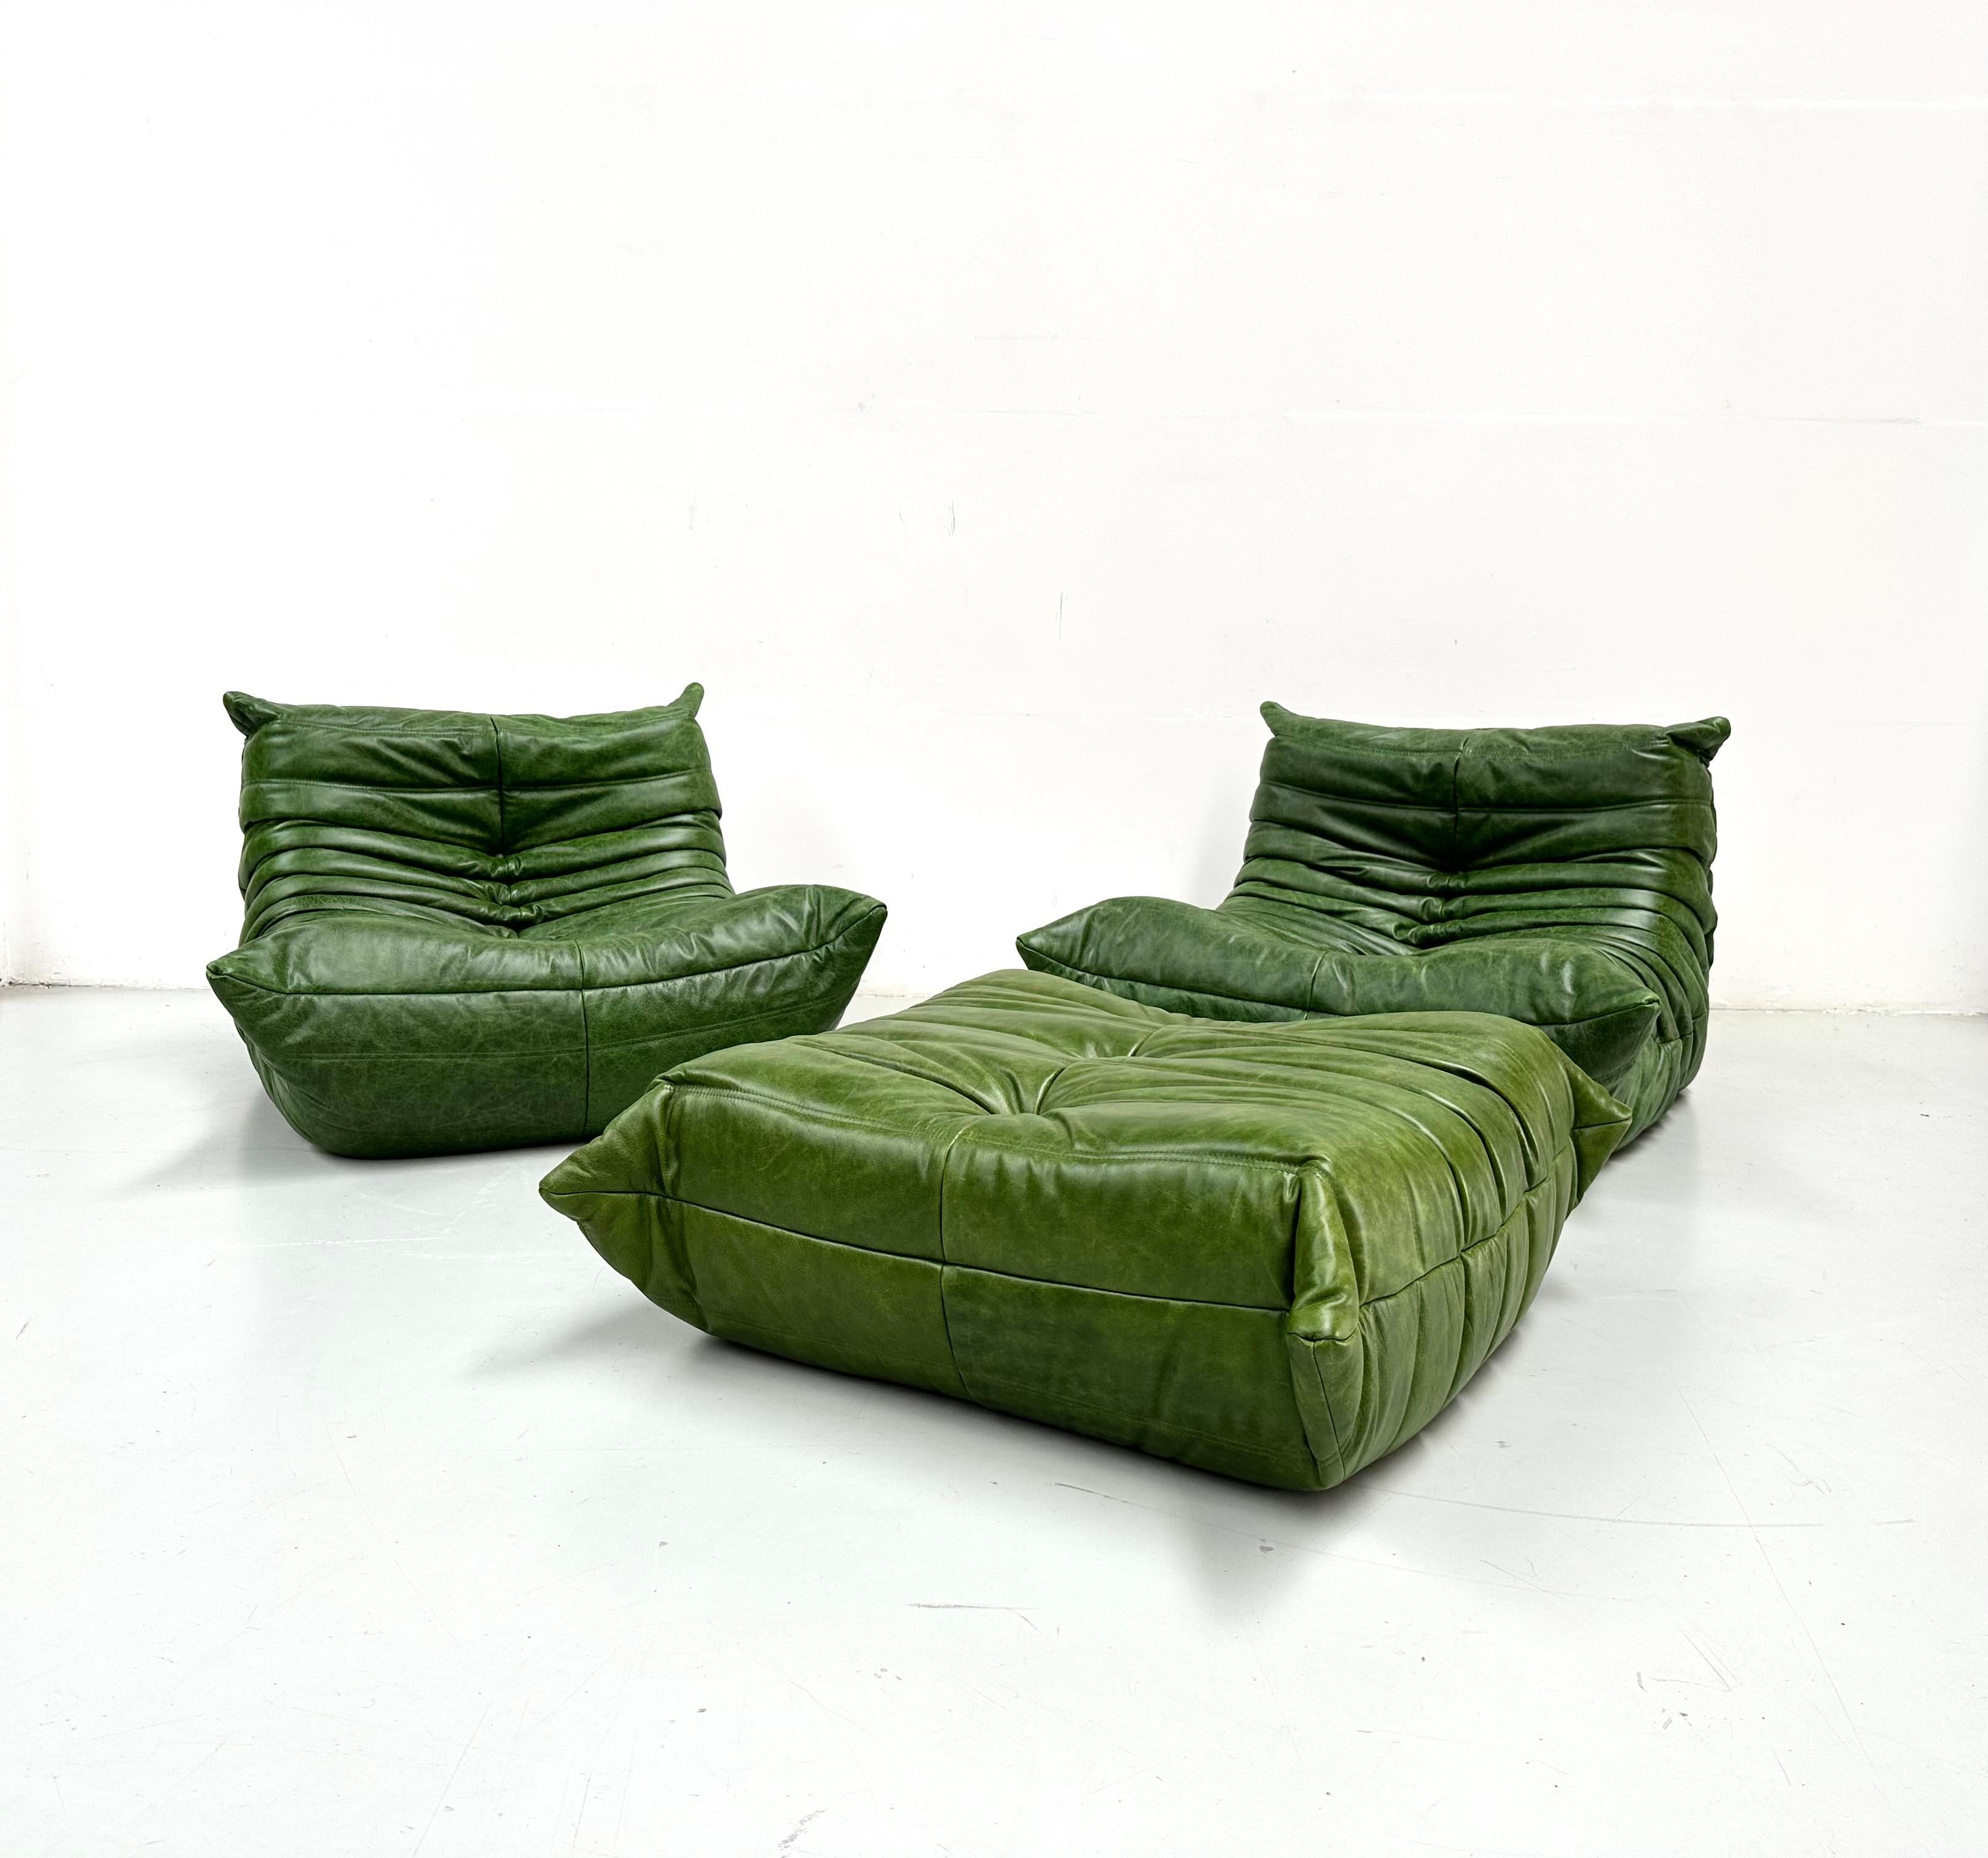 French Set of 2 Togo Chairs and Ottoman in Green Leather by M. Ducaroy for Ligne Roset.